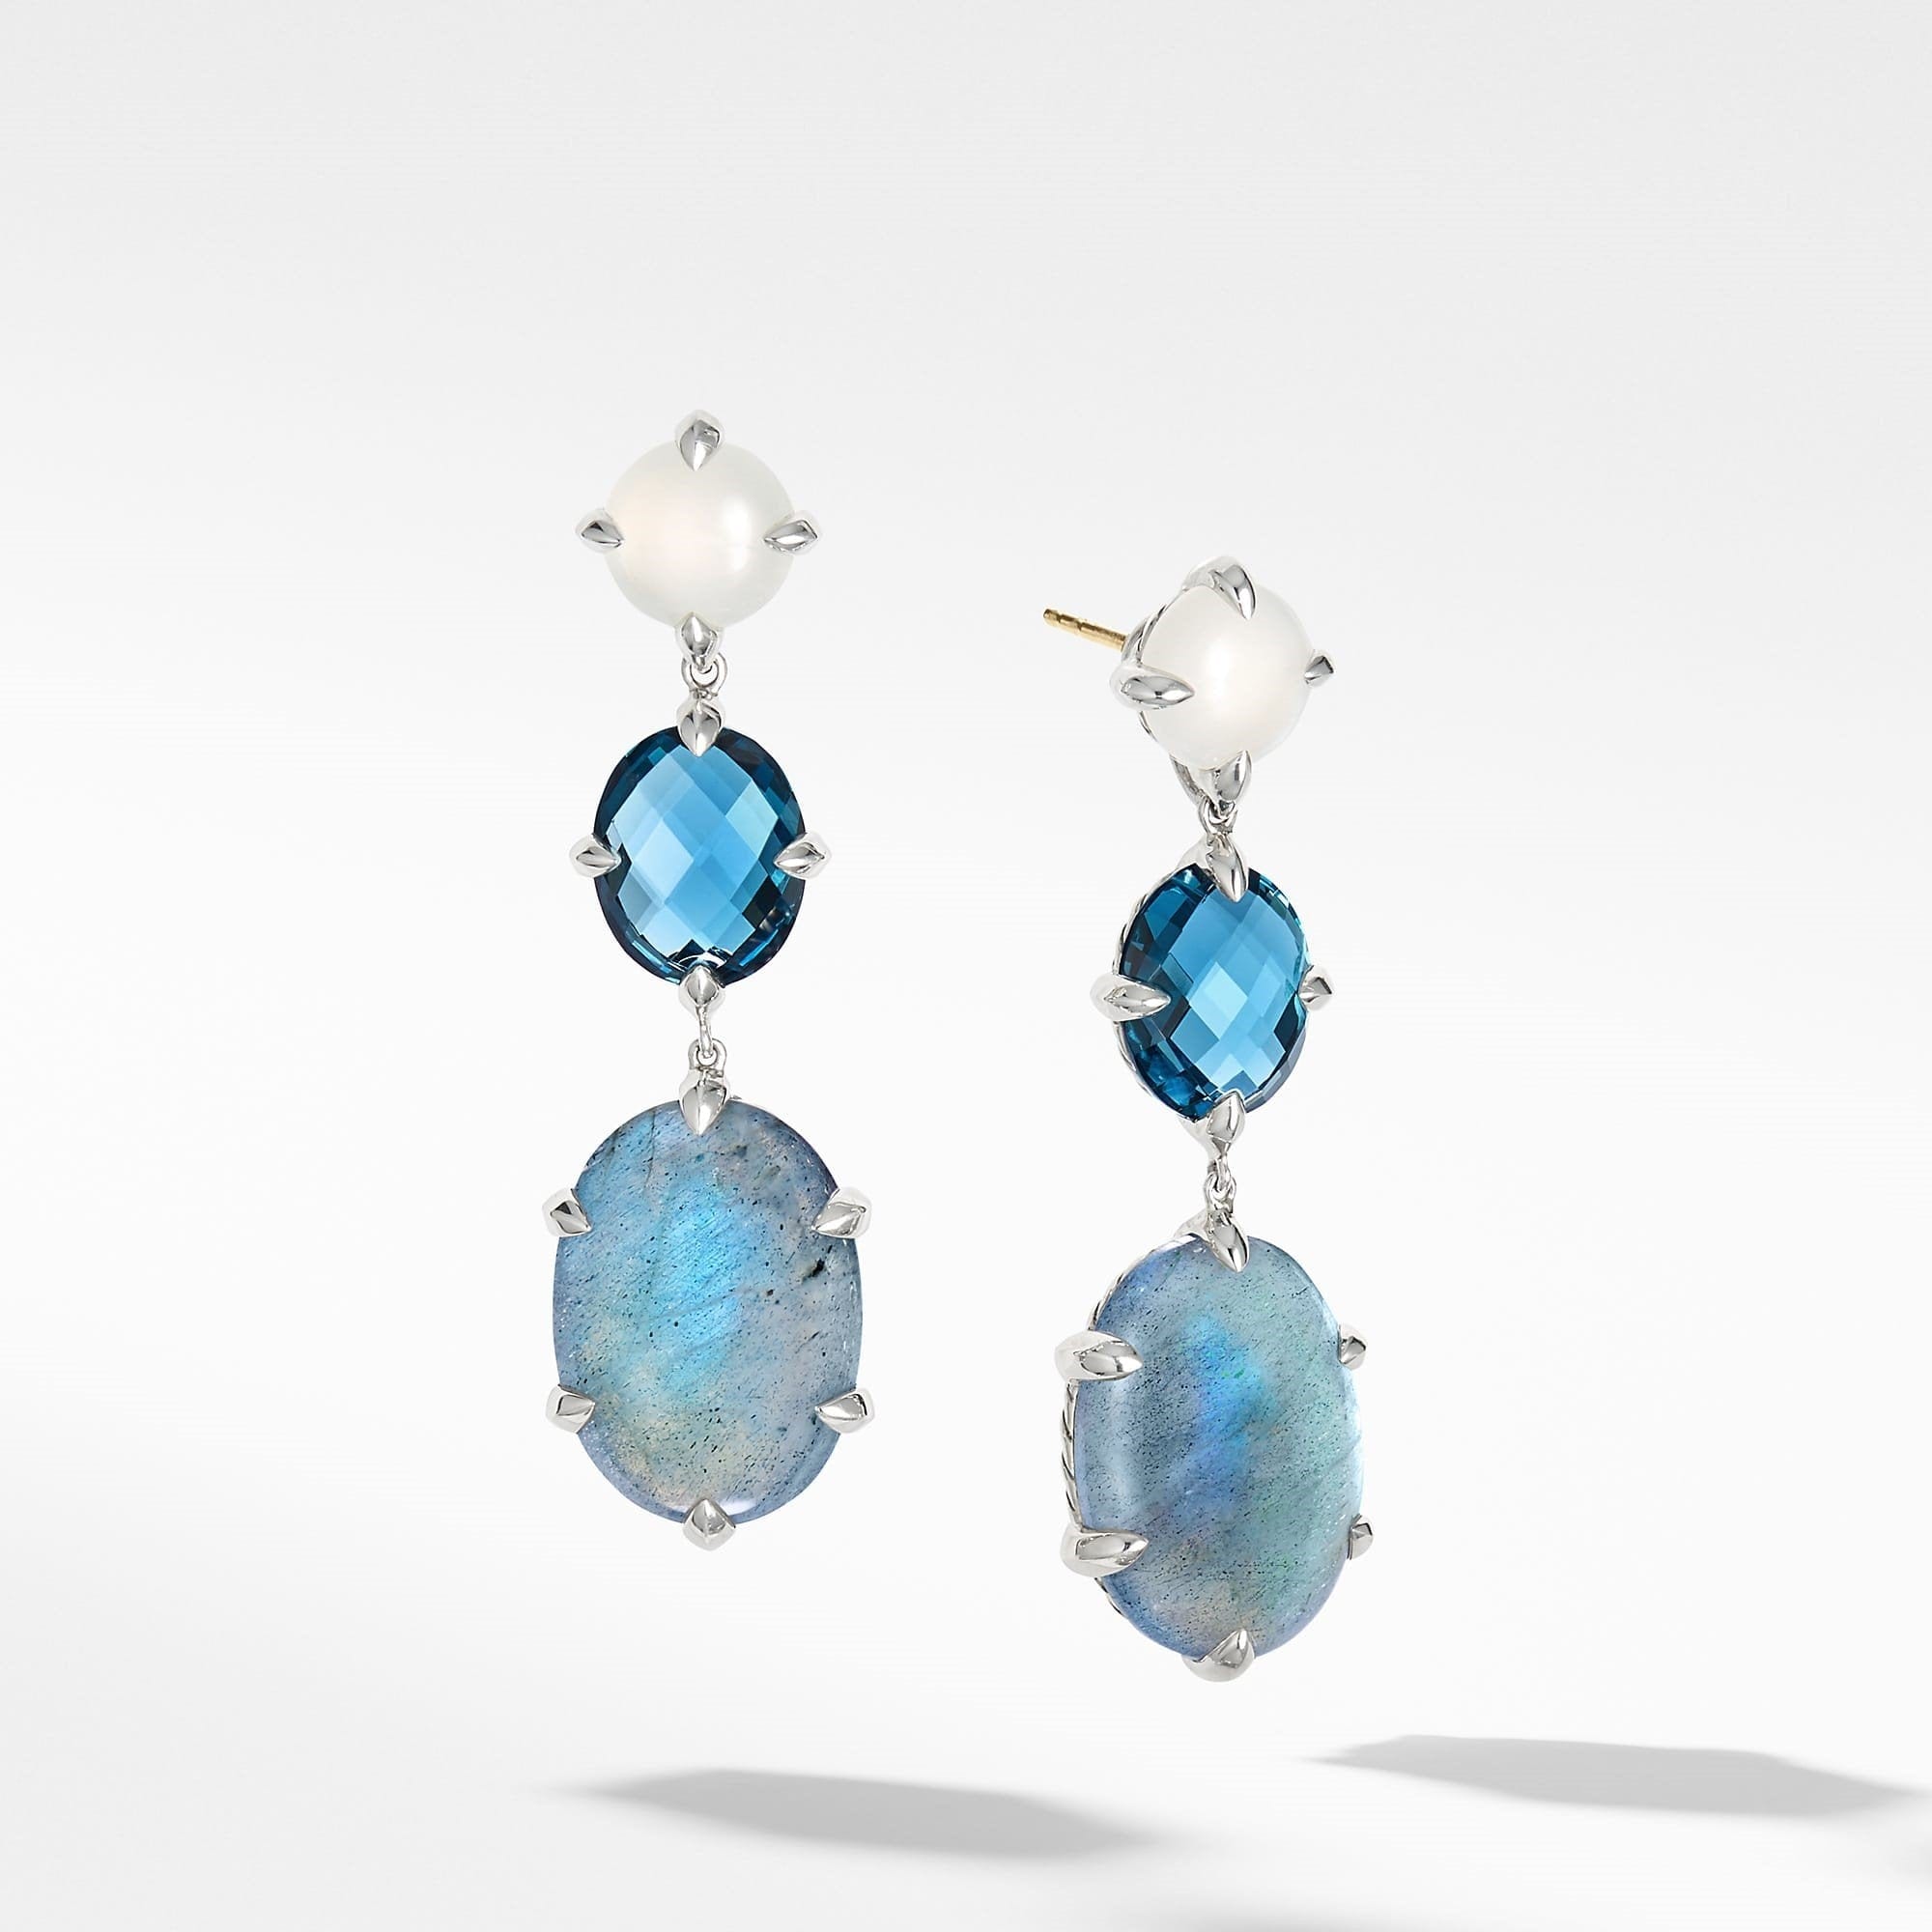 Chatelaine® Drop Earrings with Labradorite, Hampton Blue Topaz, and White Moonstone